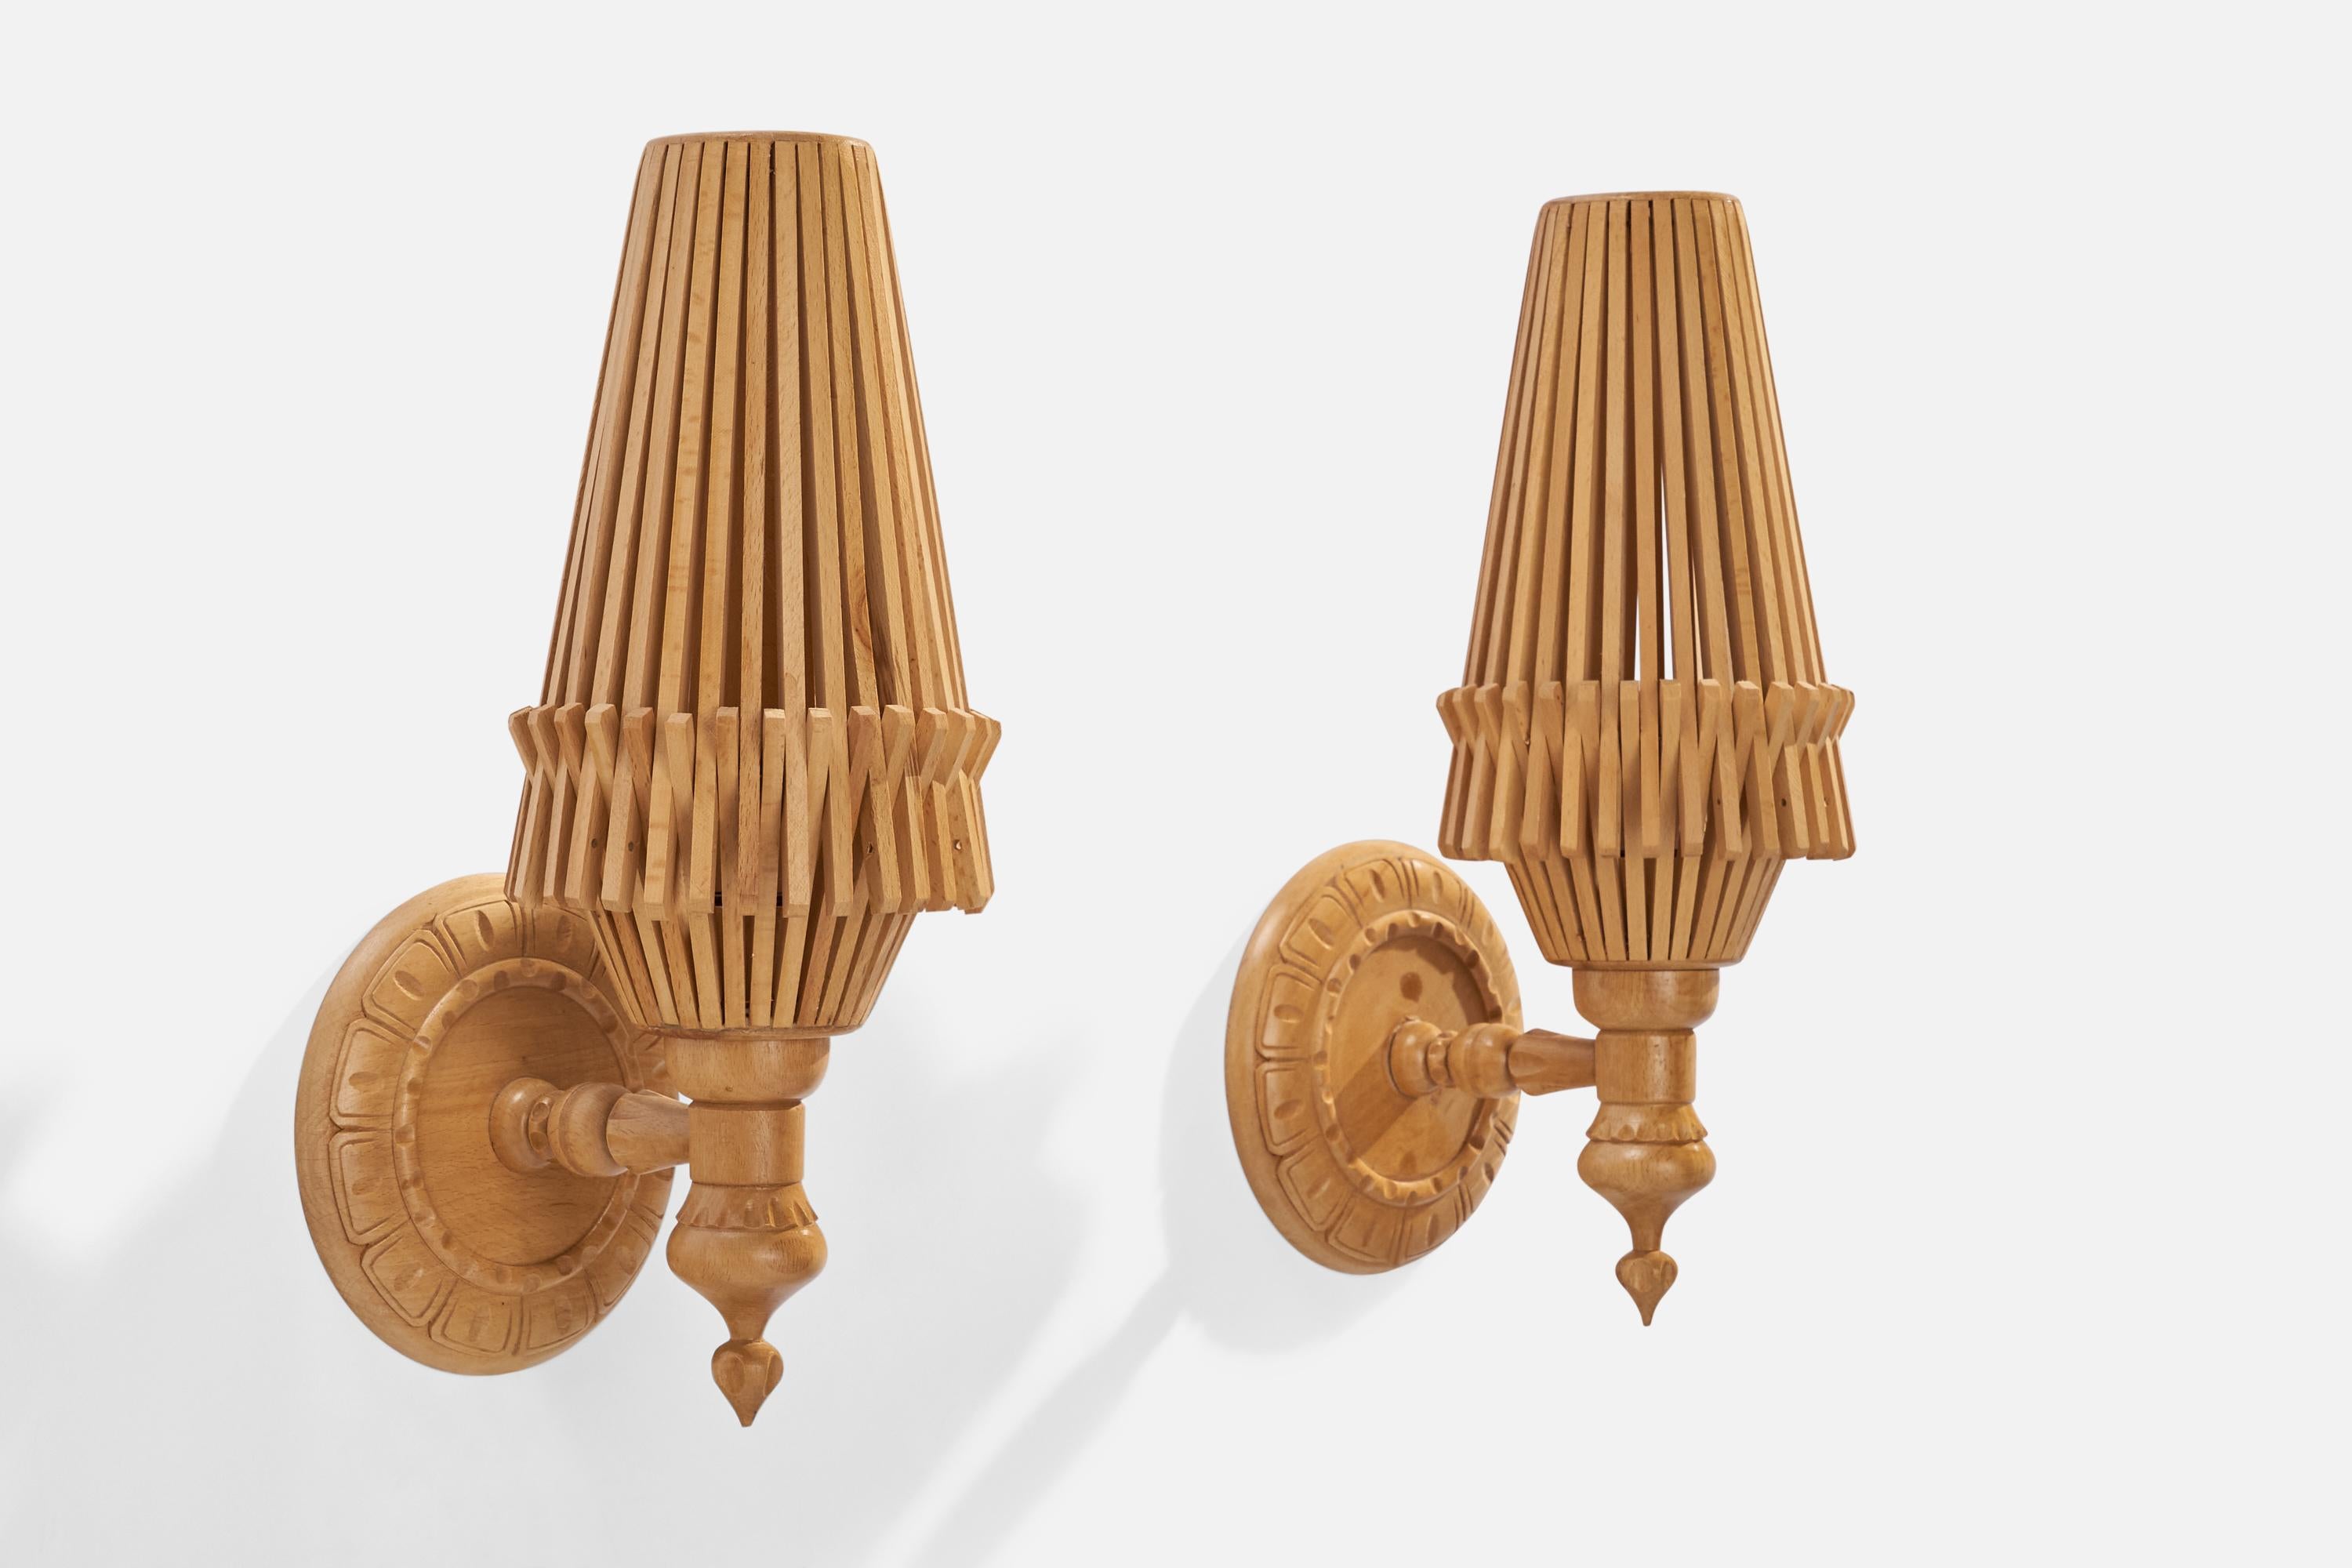 A pair of maple wall lights designed and produced in the US, 1960s.

Overall Dimensions (inches): 16”  H x 6” W x 7” D
Back Plate Dimensions (inches): 6.25” W x .75” D
Bulb Specifications: E-14 Bulb
Number of Sockets: 2
All lighting will be